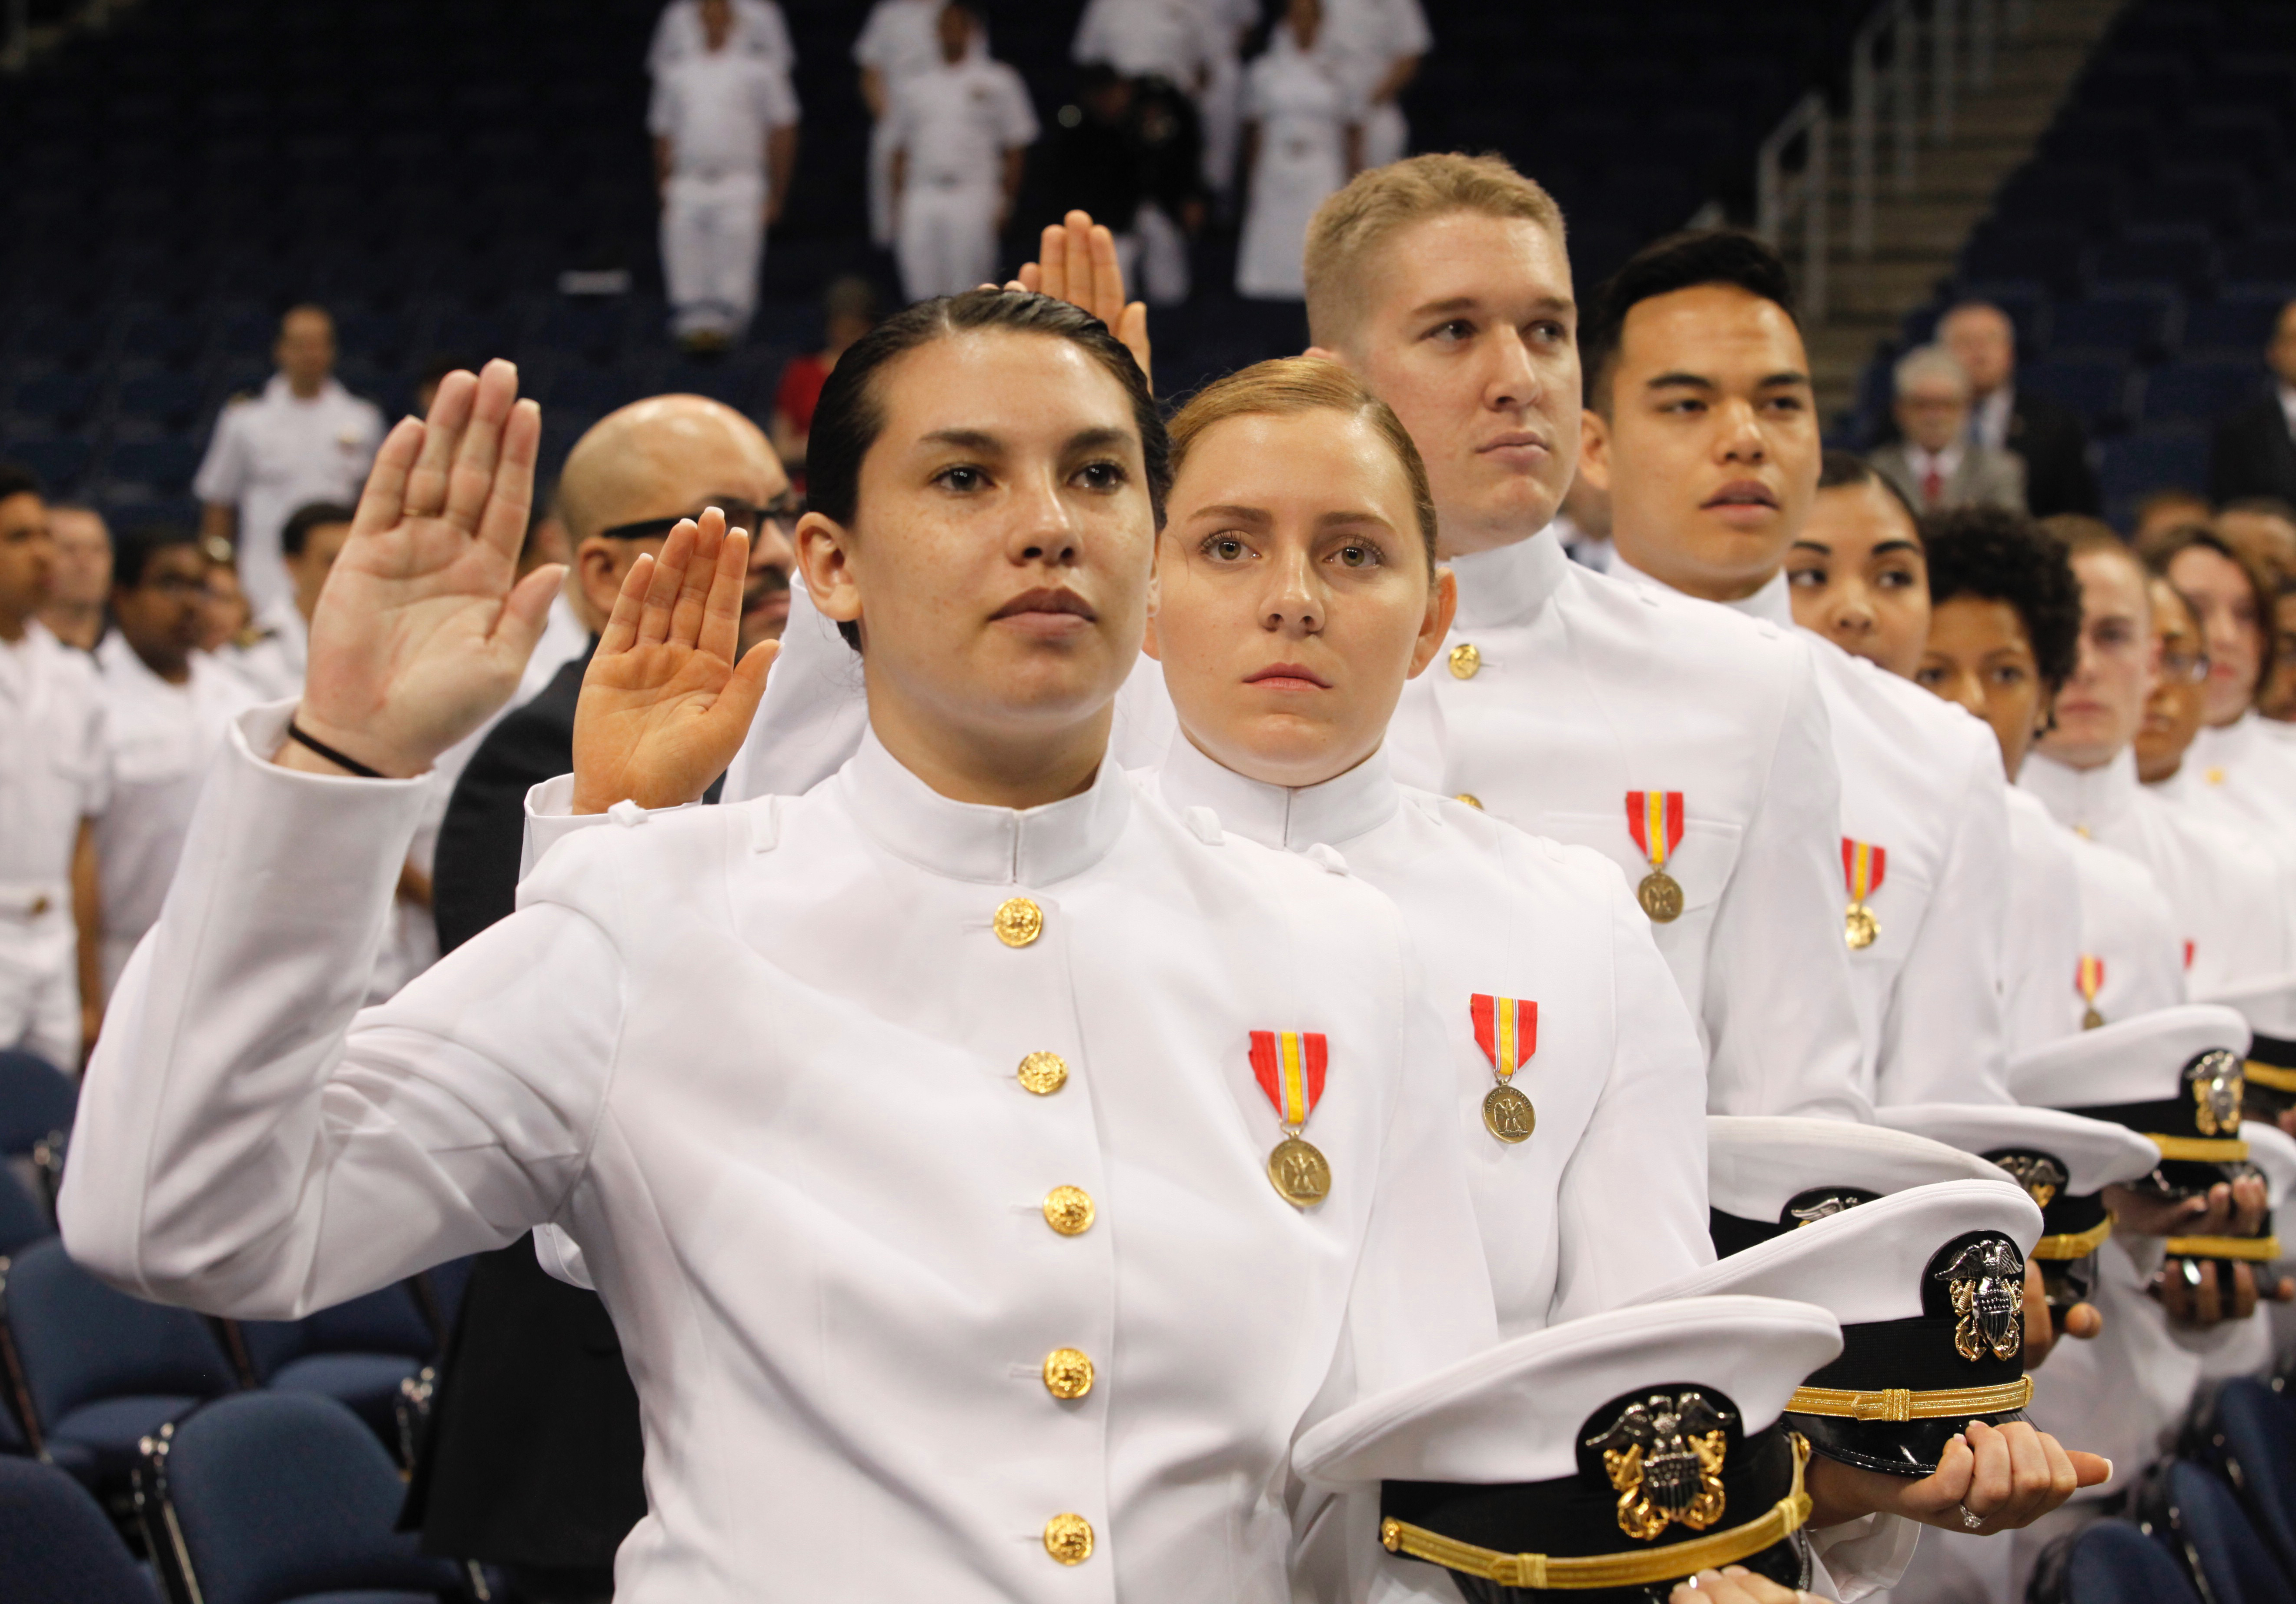 2018 Spring Commissioning Ceremony